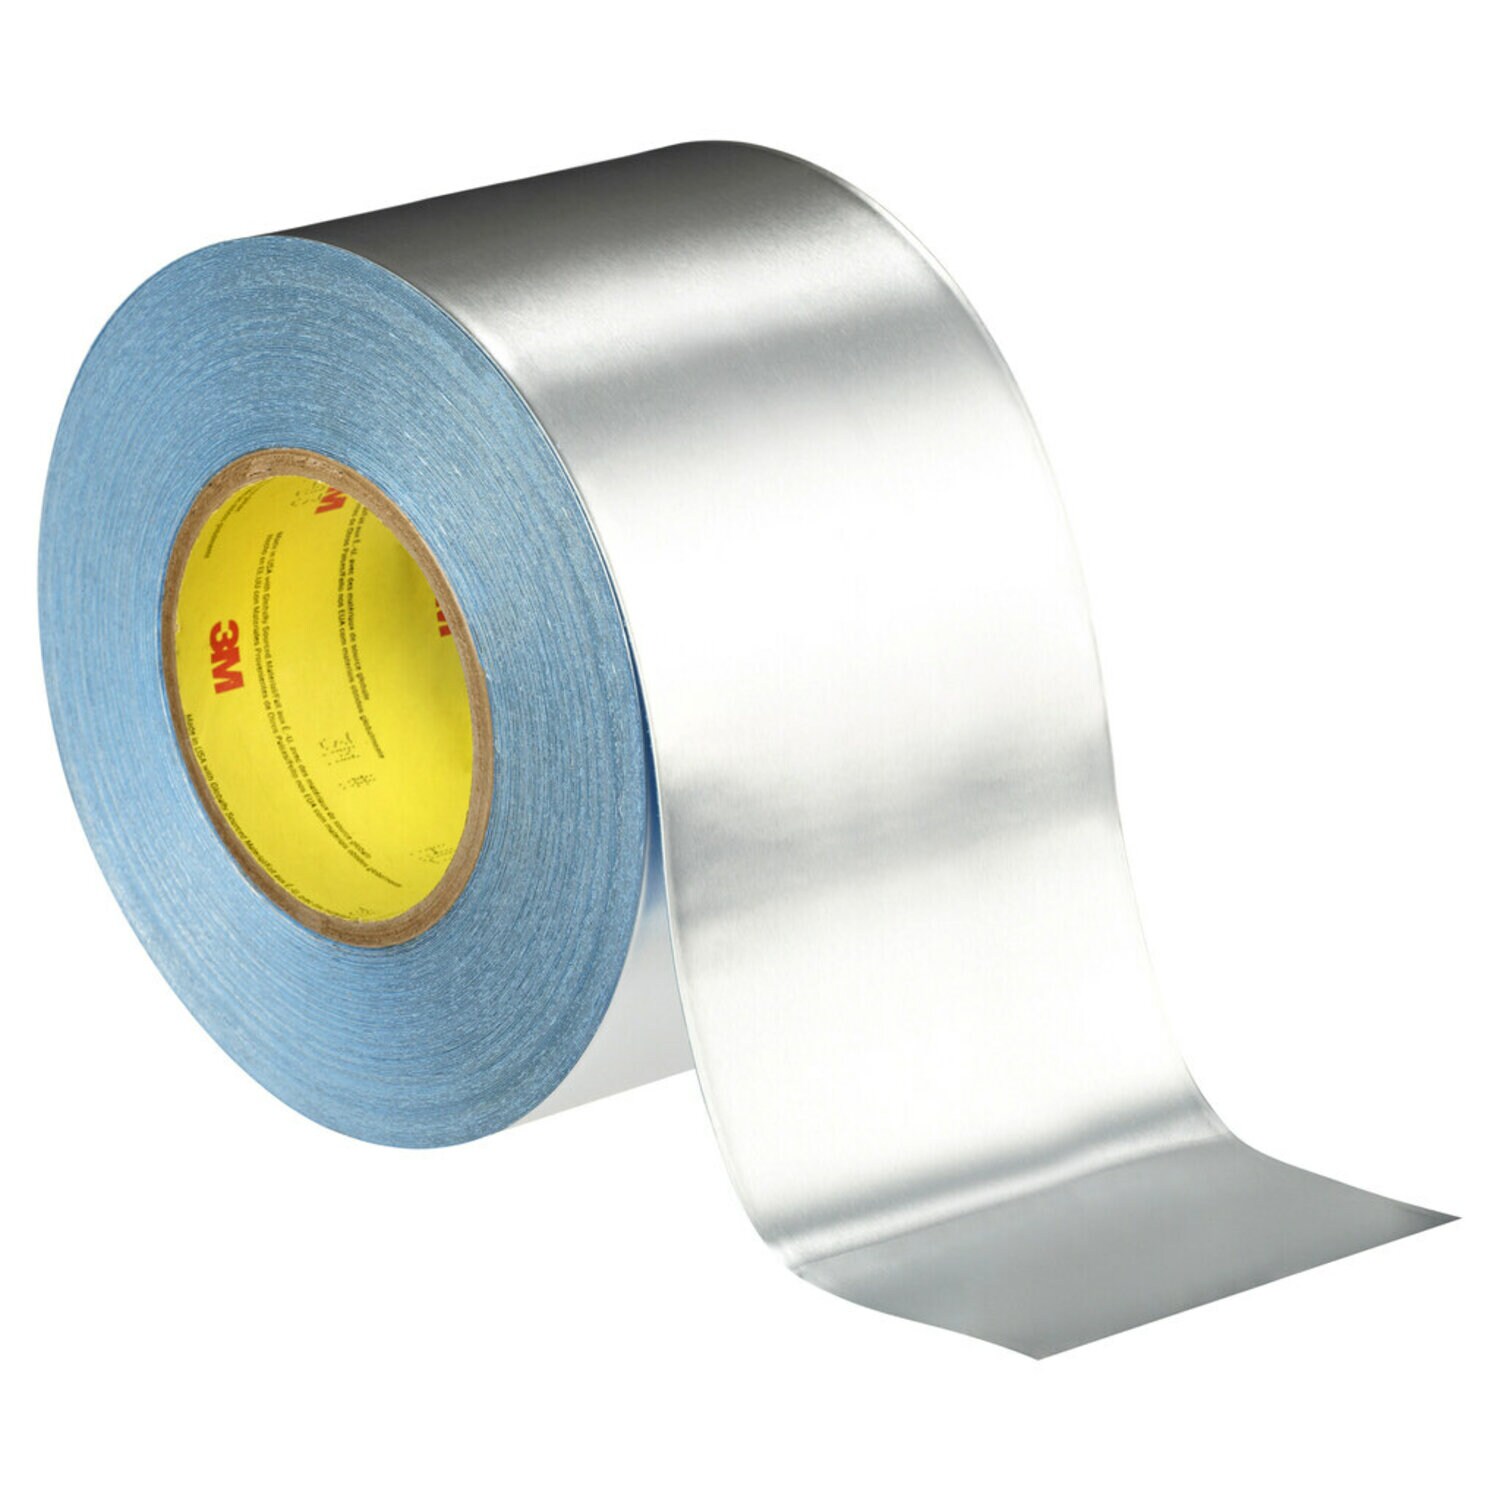 7000049128 - 3M Vibration Damping Tape 436, Silver, 4 in x 36 yd, 17.5 mil, 3 rolls
per case